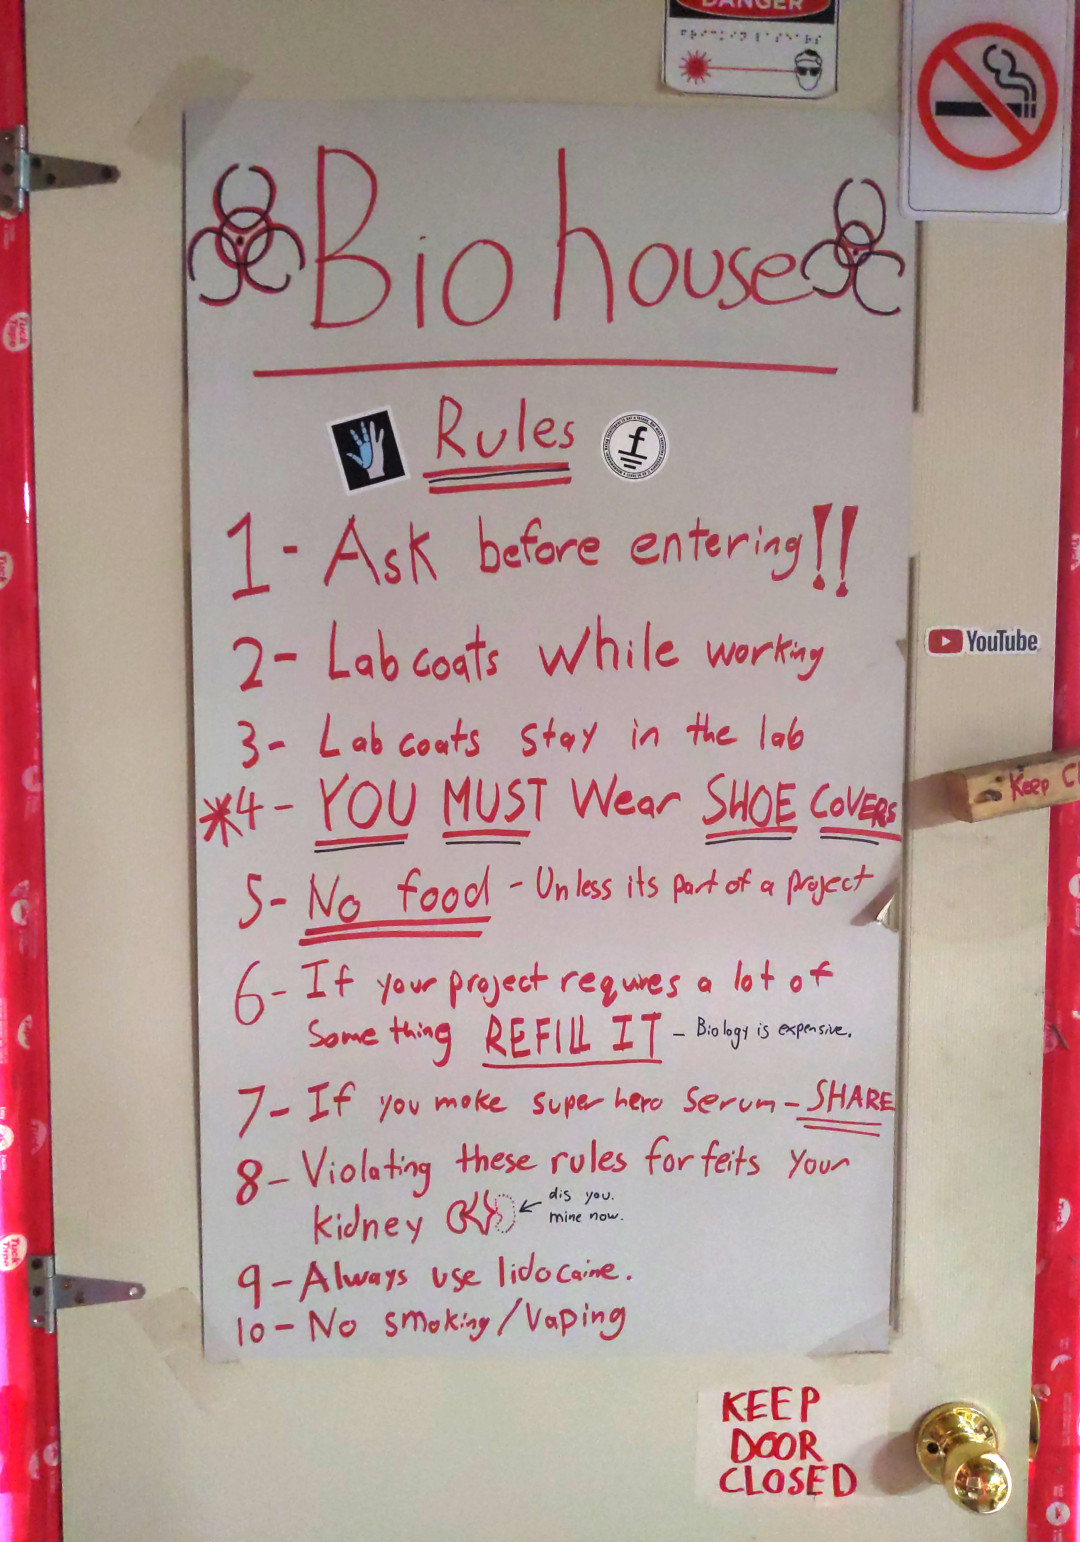 The entrance of the bio-hacking house, with a list of rules